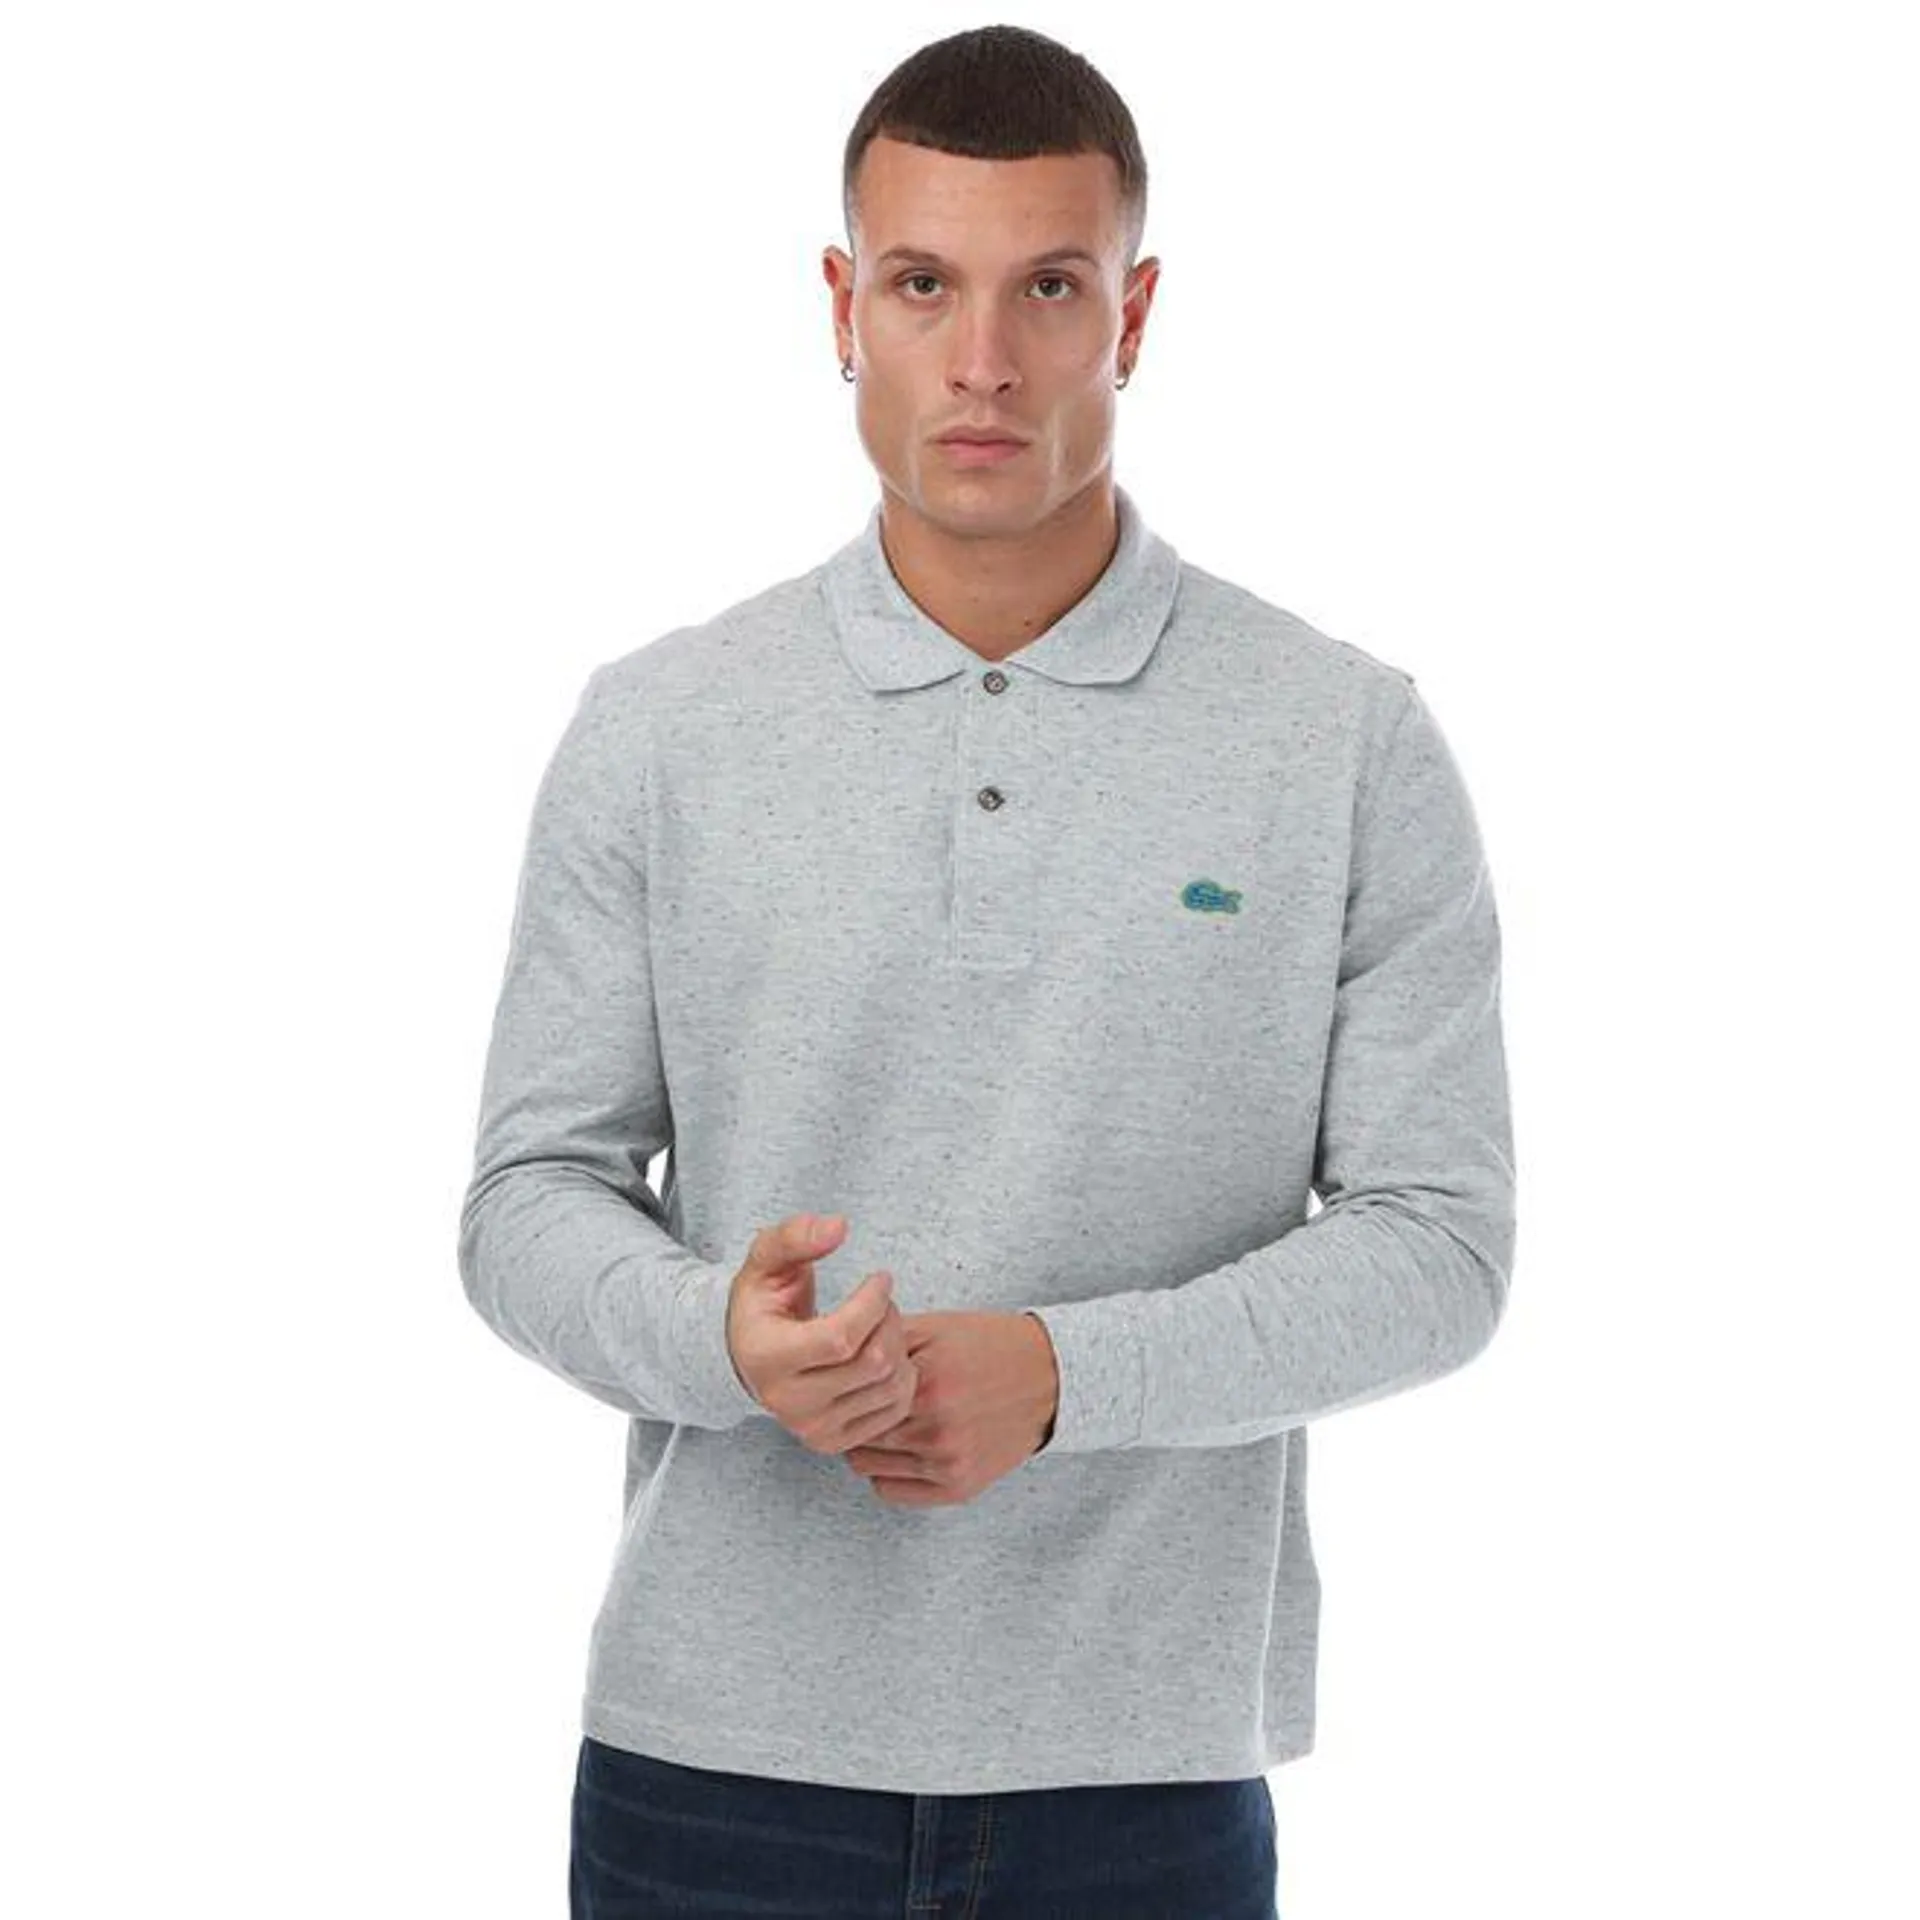 Lacoste Mens Classic Fit Speckled Print Polo Shirt in Grey